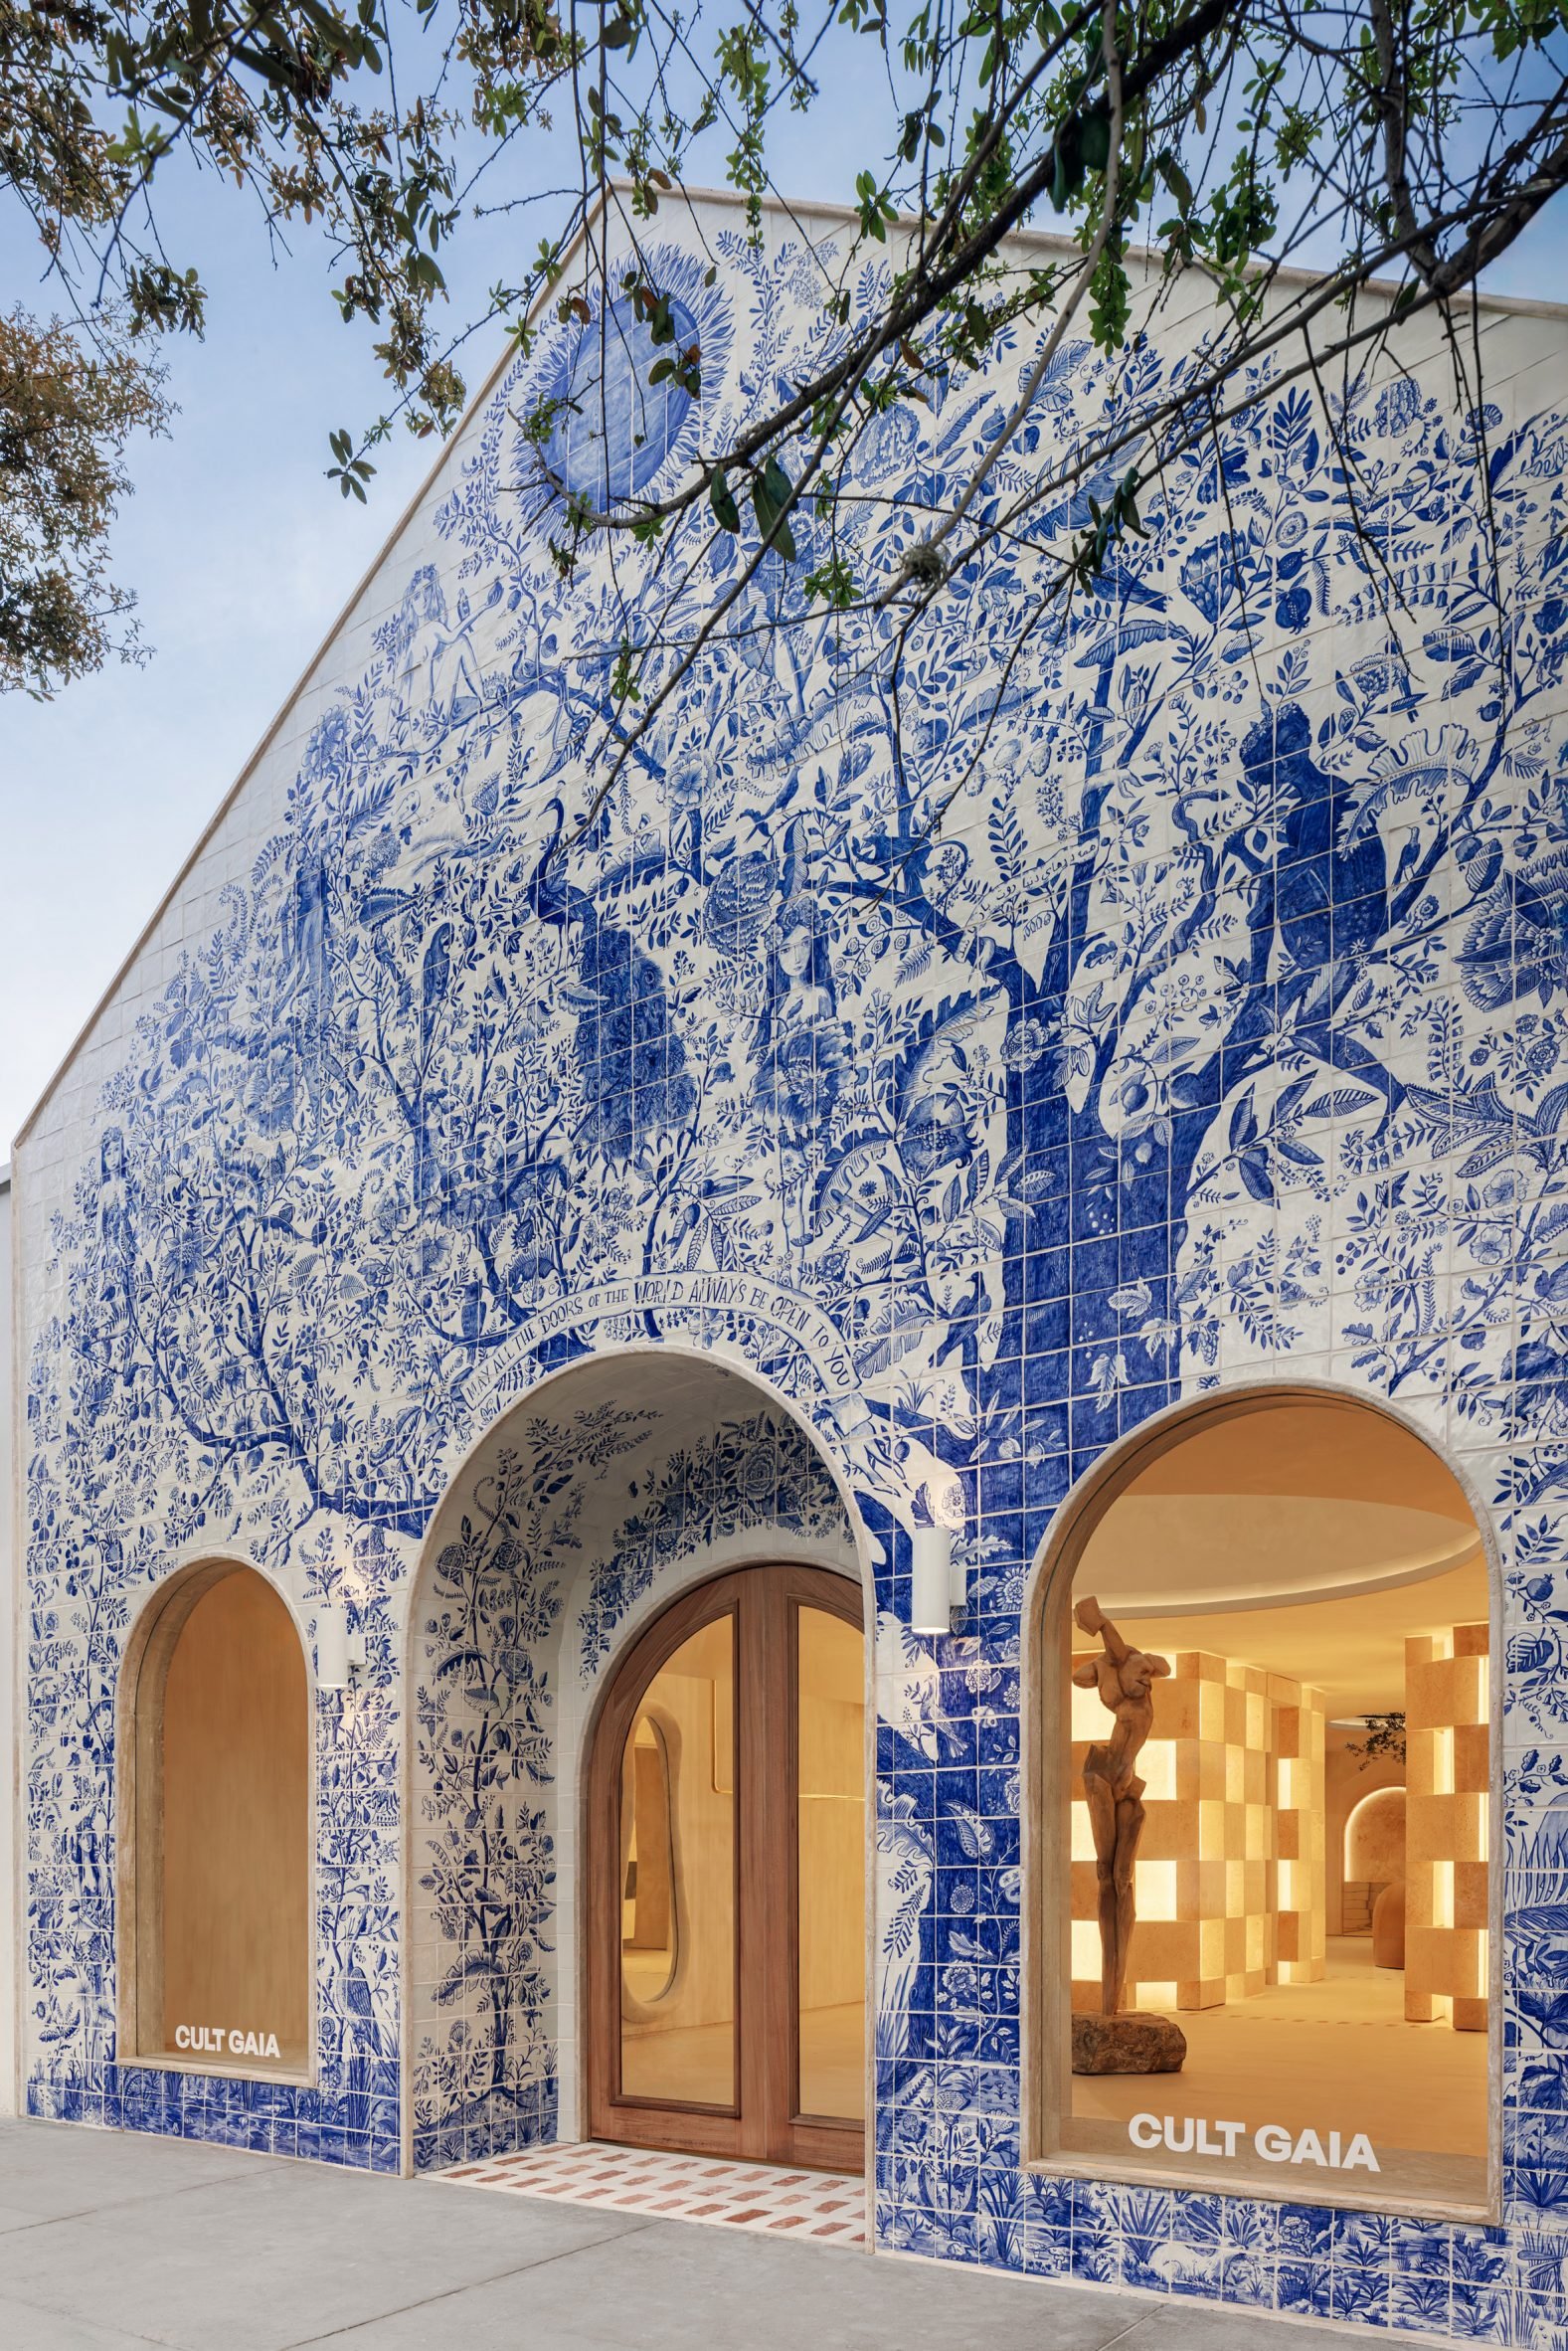 Blue tree of life mural painted across a tiled facade, viewed from an angle